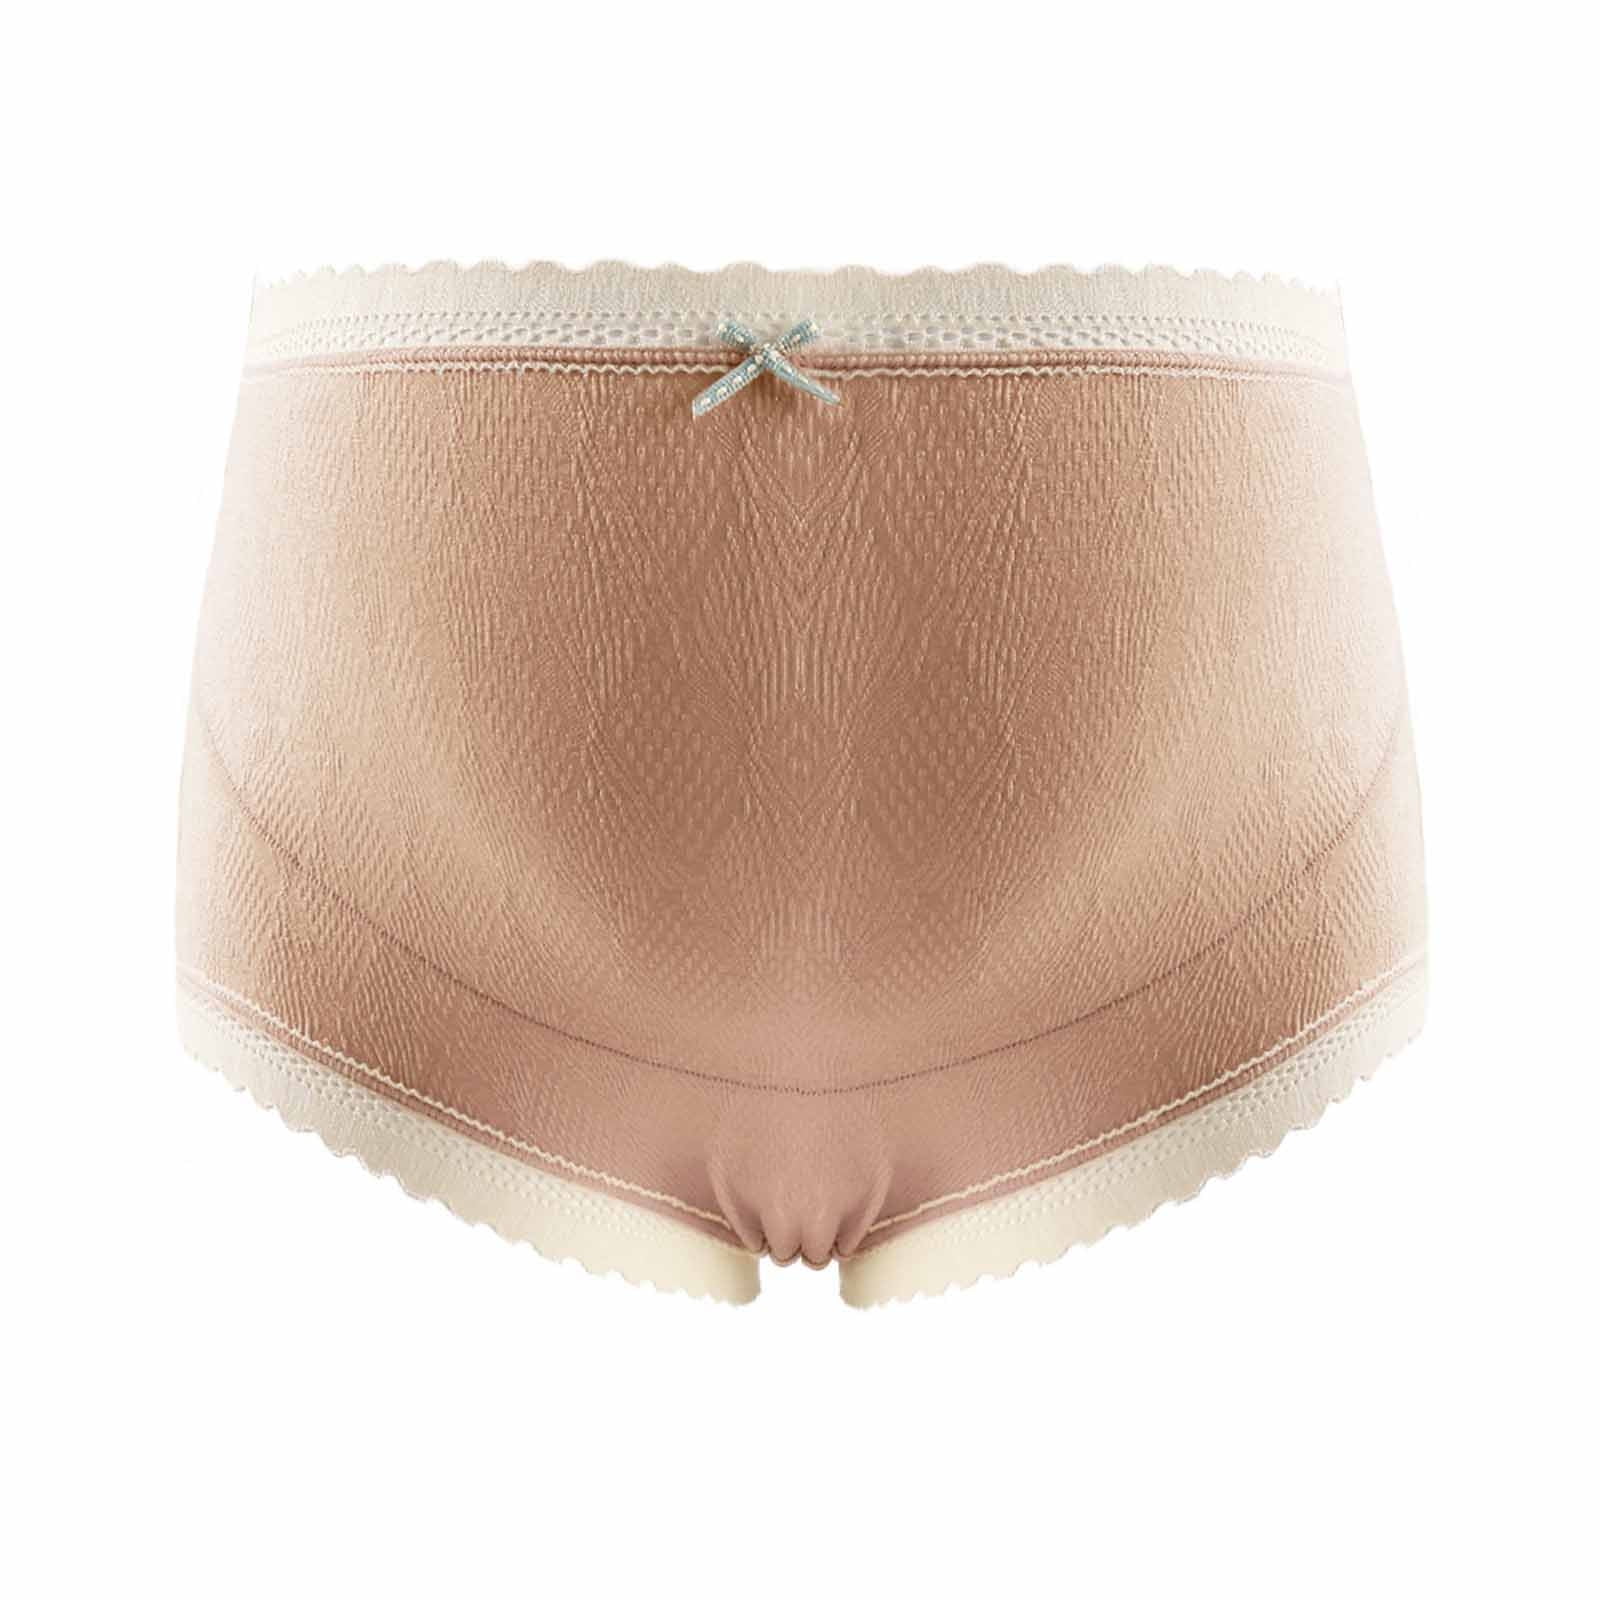 Autumnz Bamboo Maternity Panty Panties Underwear *Seamless Low waist Full  back coverage Breathable super soft